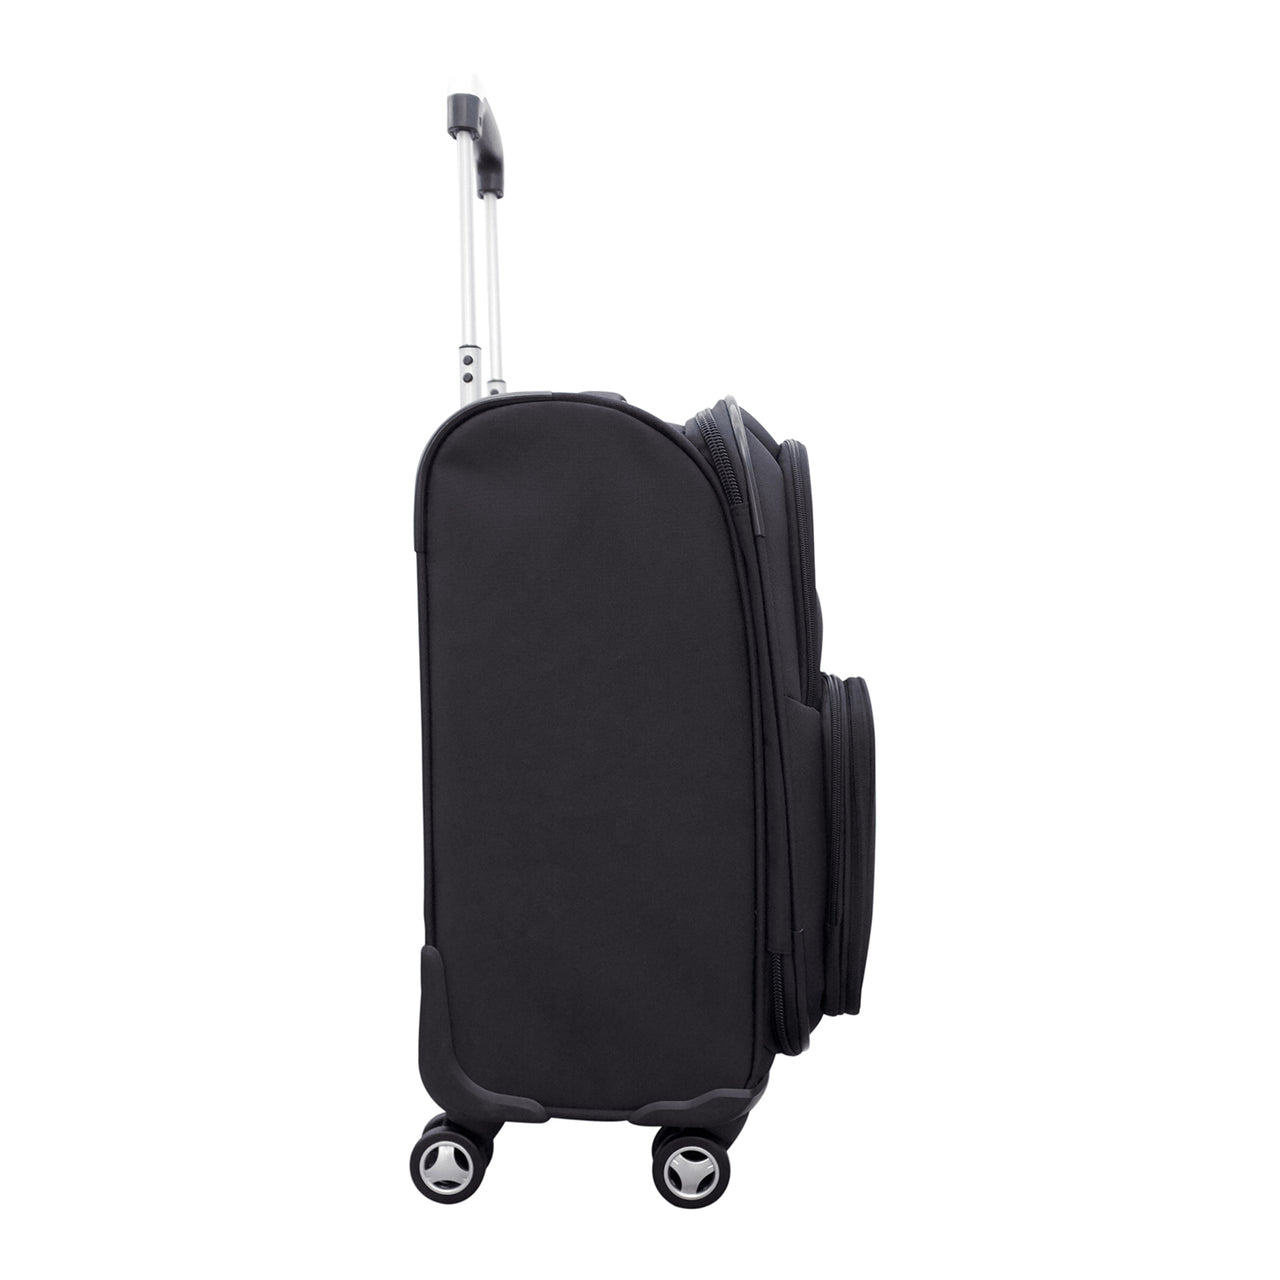 Providence Friars 21" Carry-on Spinner Luggage